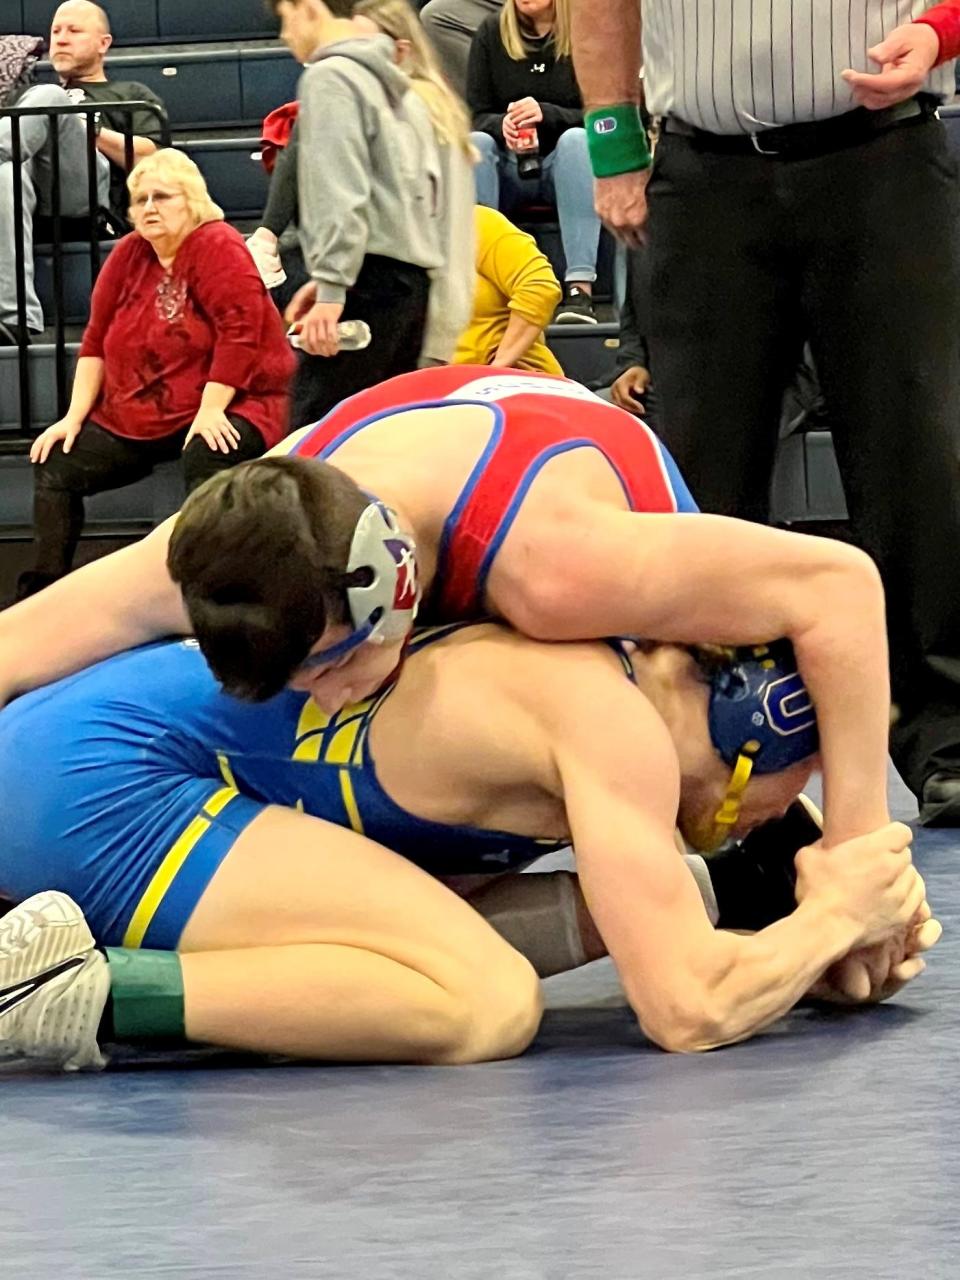 Highland's Cael Gilmore, top, ties up Ontario's Mason Turnbaugh in the 150-pound championship match at the Mid Ohio Athletic Conference Wrestling Tournament Saturday at Galion.